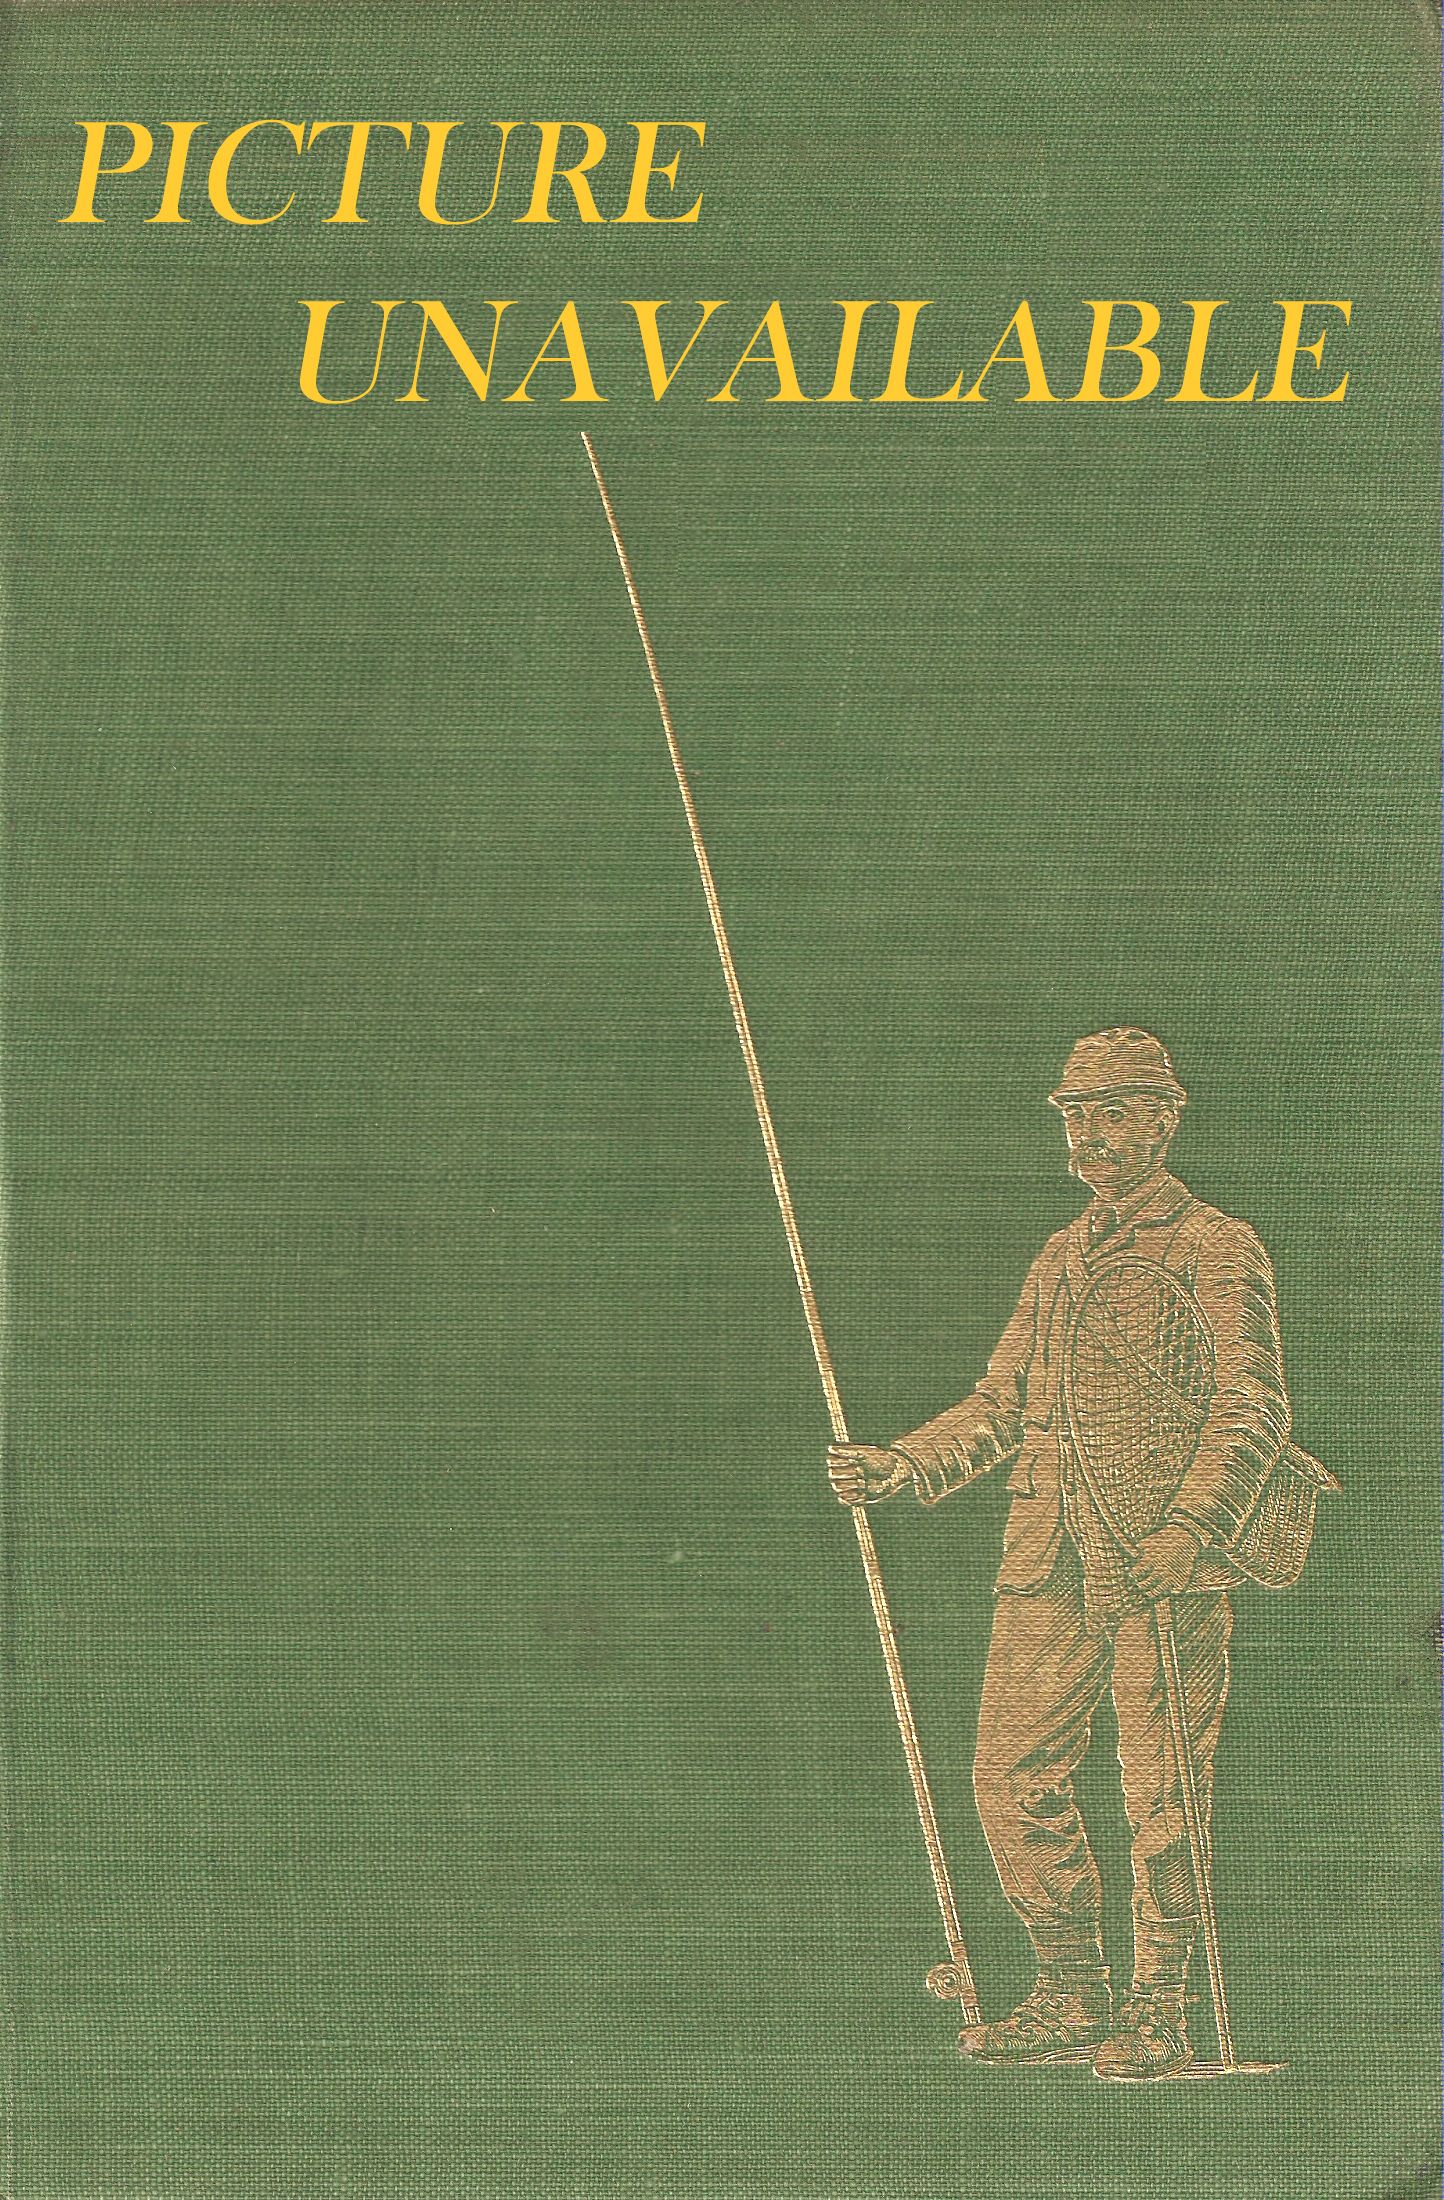 CREEL: A FISHING MAGAZINE. Volume 3, number 4. October 1965.